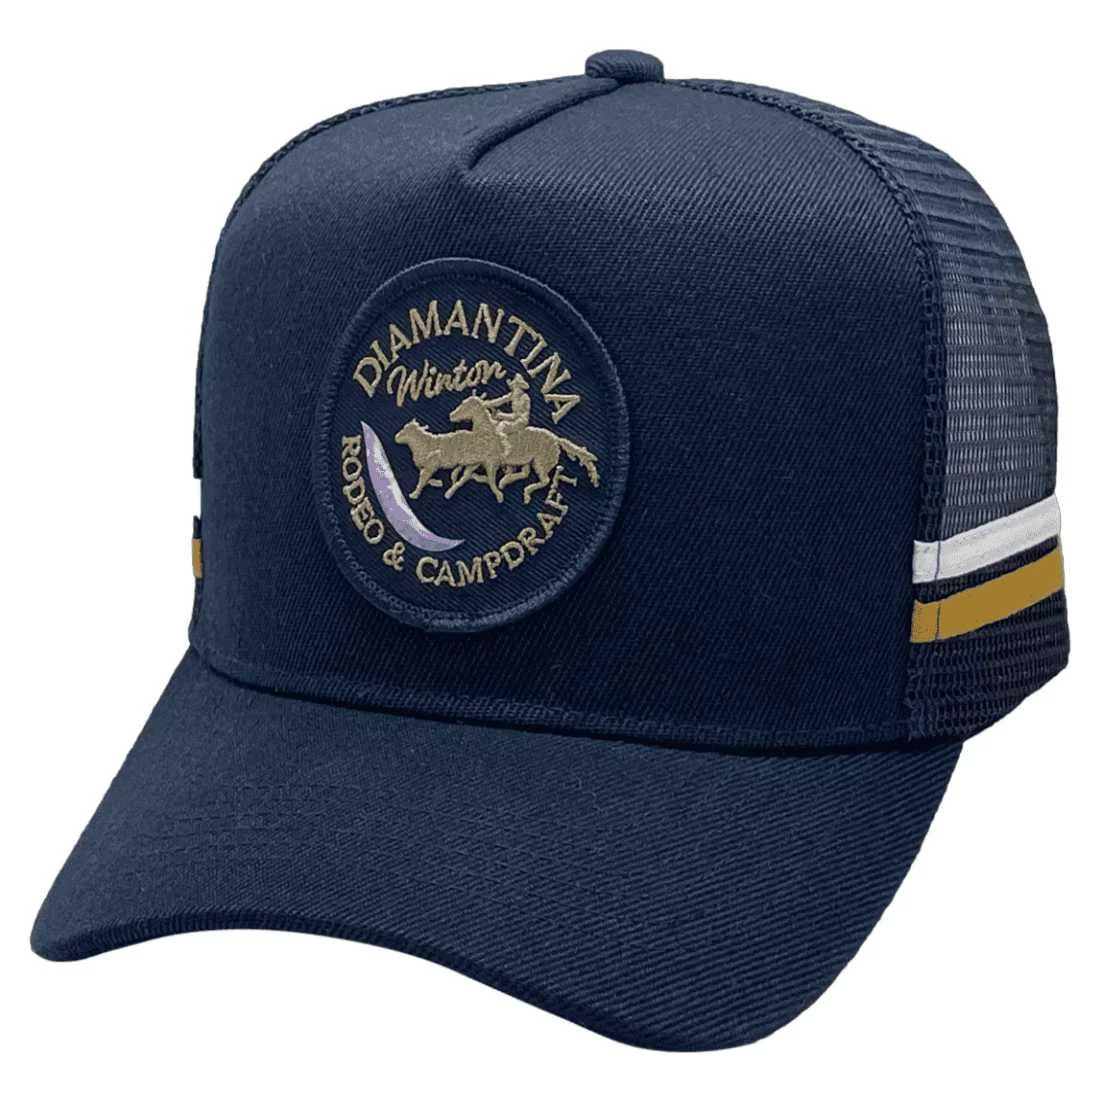 Diamantina Winton Rodeo and Campdraft Winton Qld HP Original Basic Aussie trucker Hat with Australian Head Fit Crown and Double Side Bands Navy